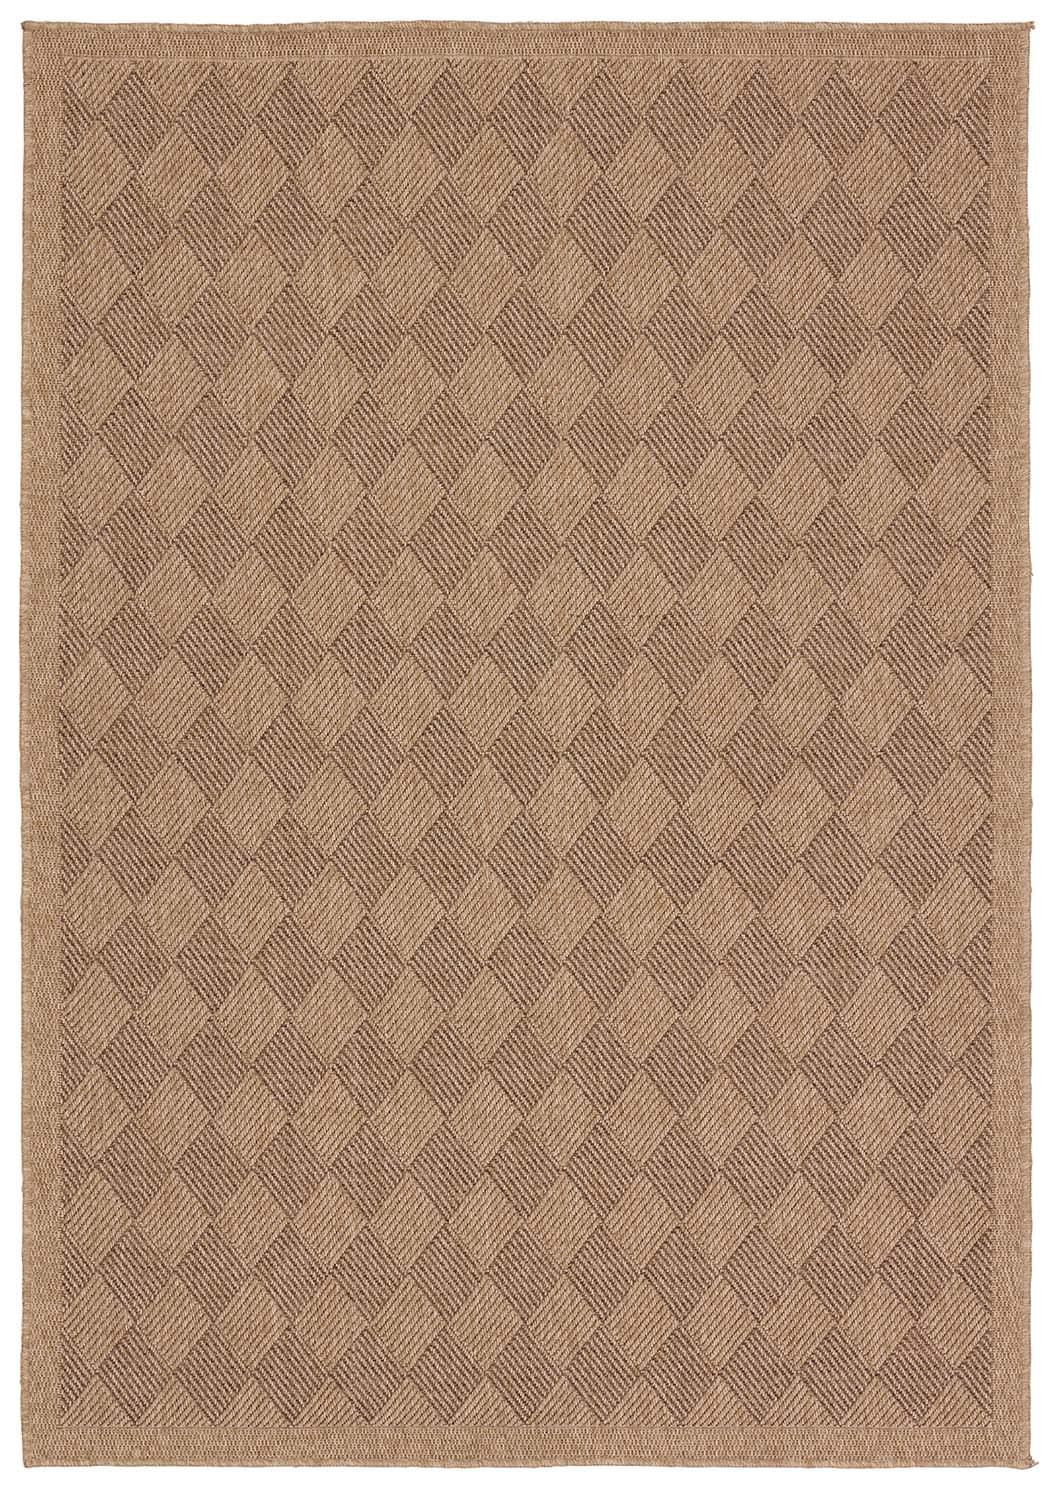 Vibe by Jaipur Living Amanar Indoor/Outdoor Tribal Brown Area Rug  Product Image